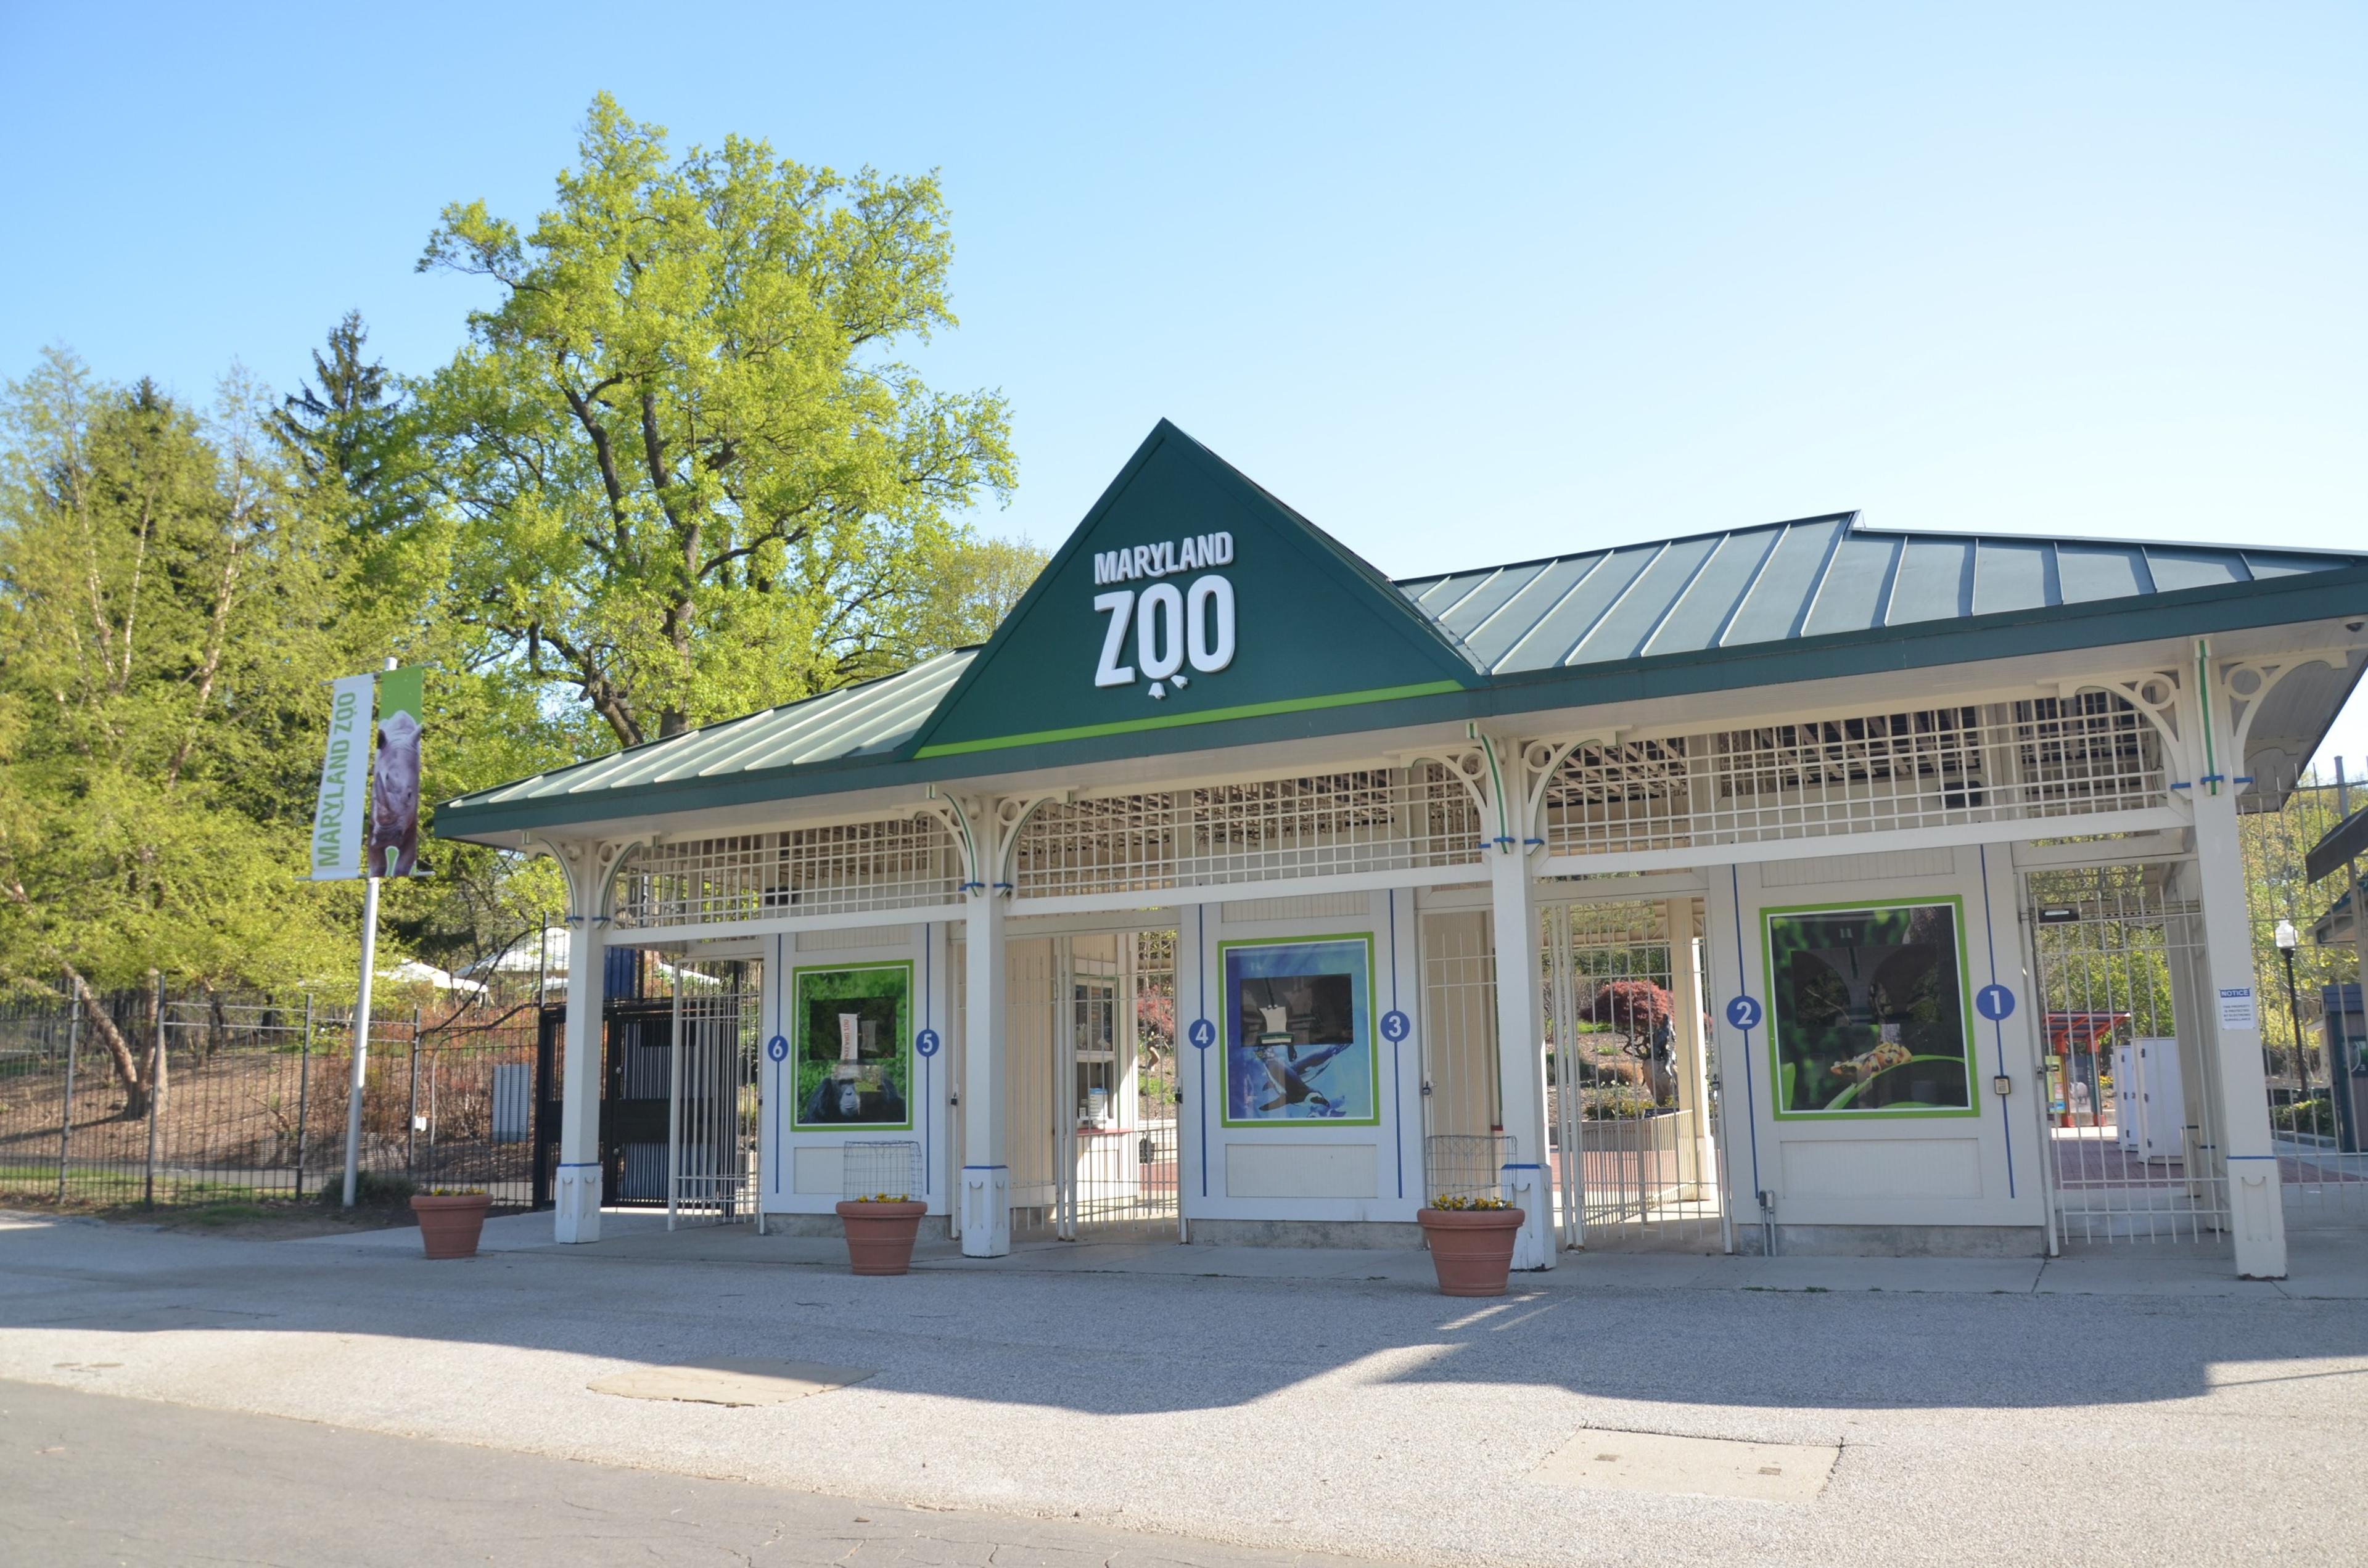 The Maryland Zoo in Baltimore